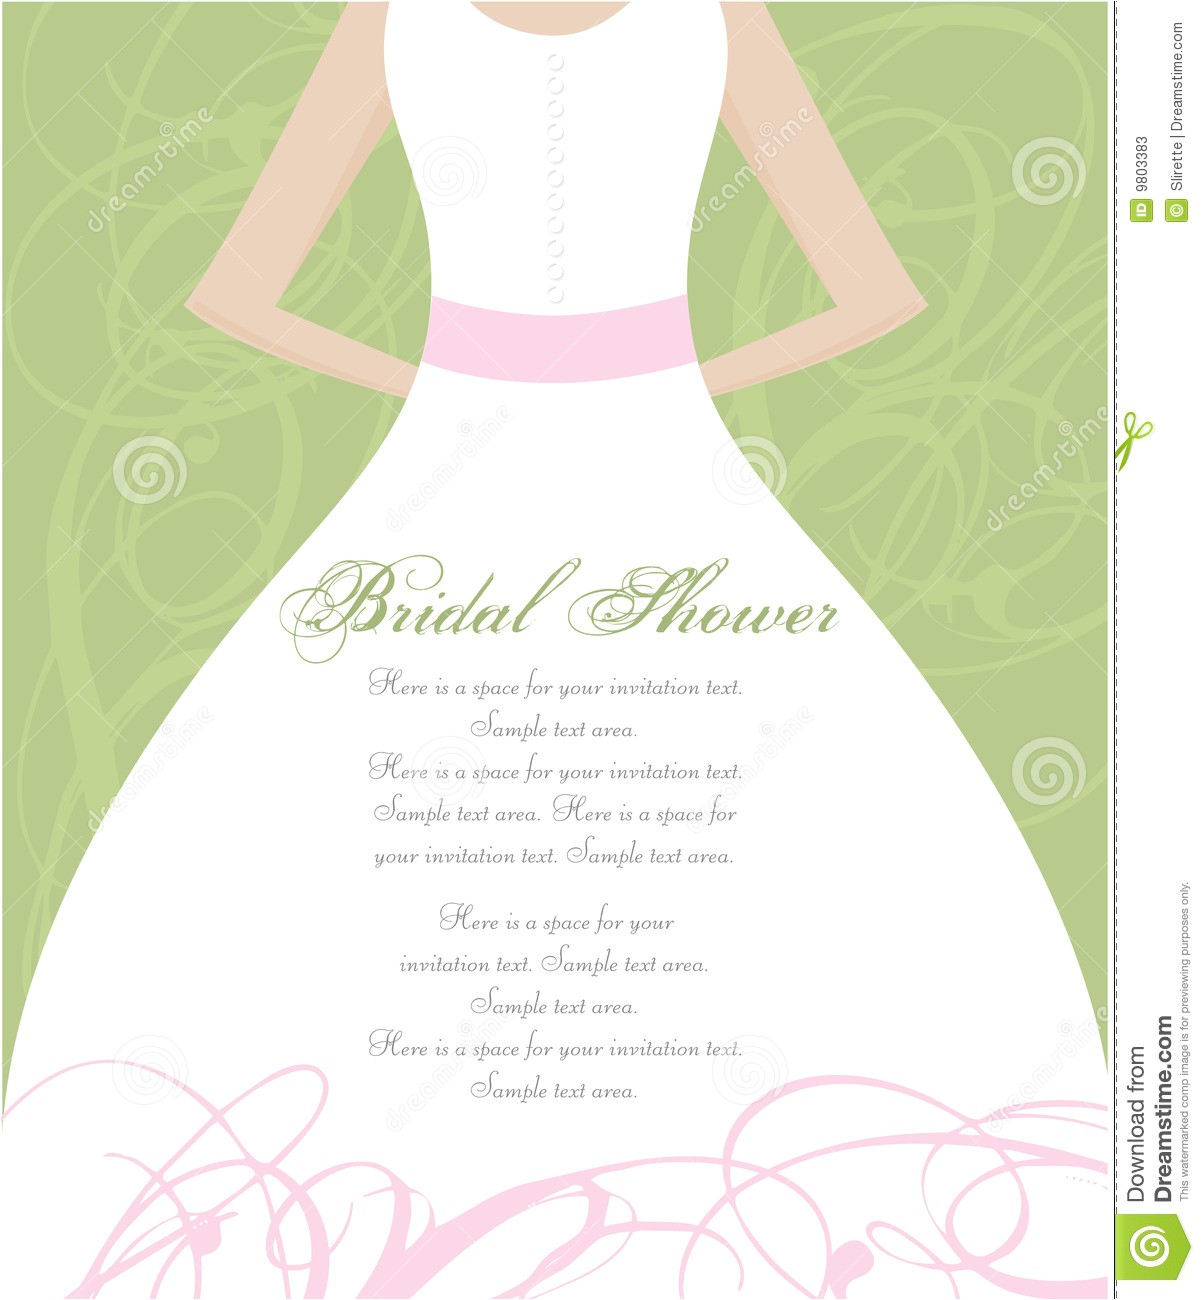 Free Bridal Shower Clipart for Invitations Bridal Shower Clipart for Invitations – 101 Clip Art